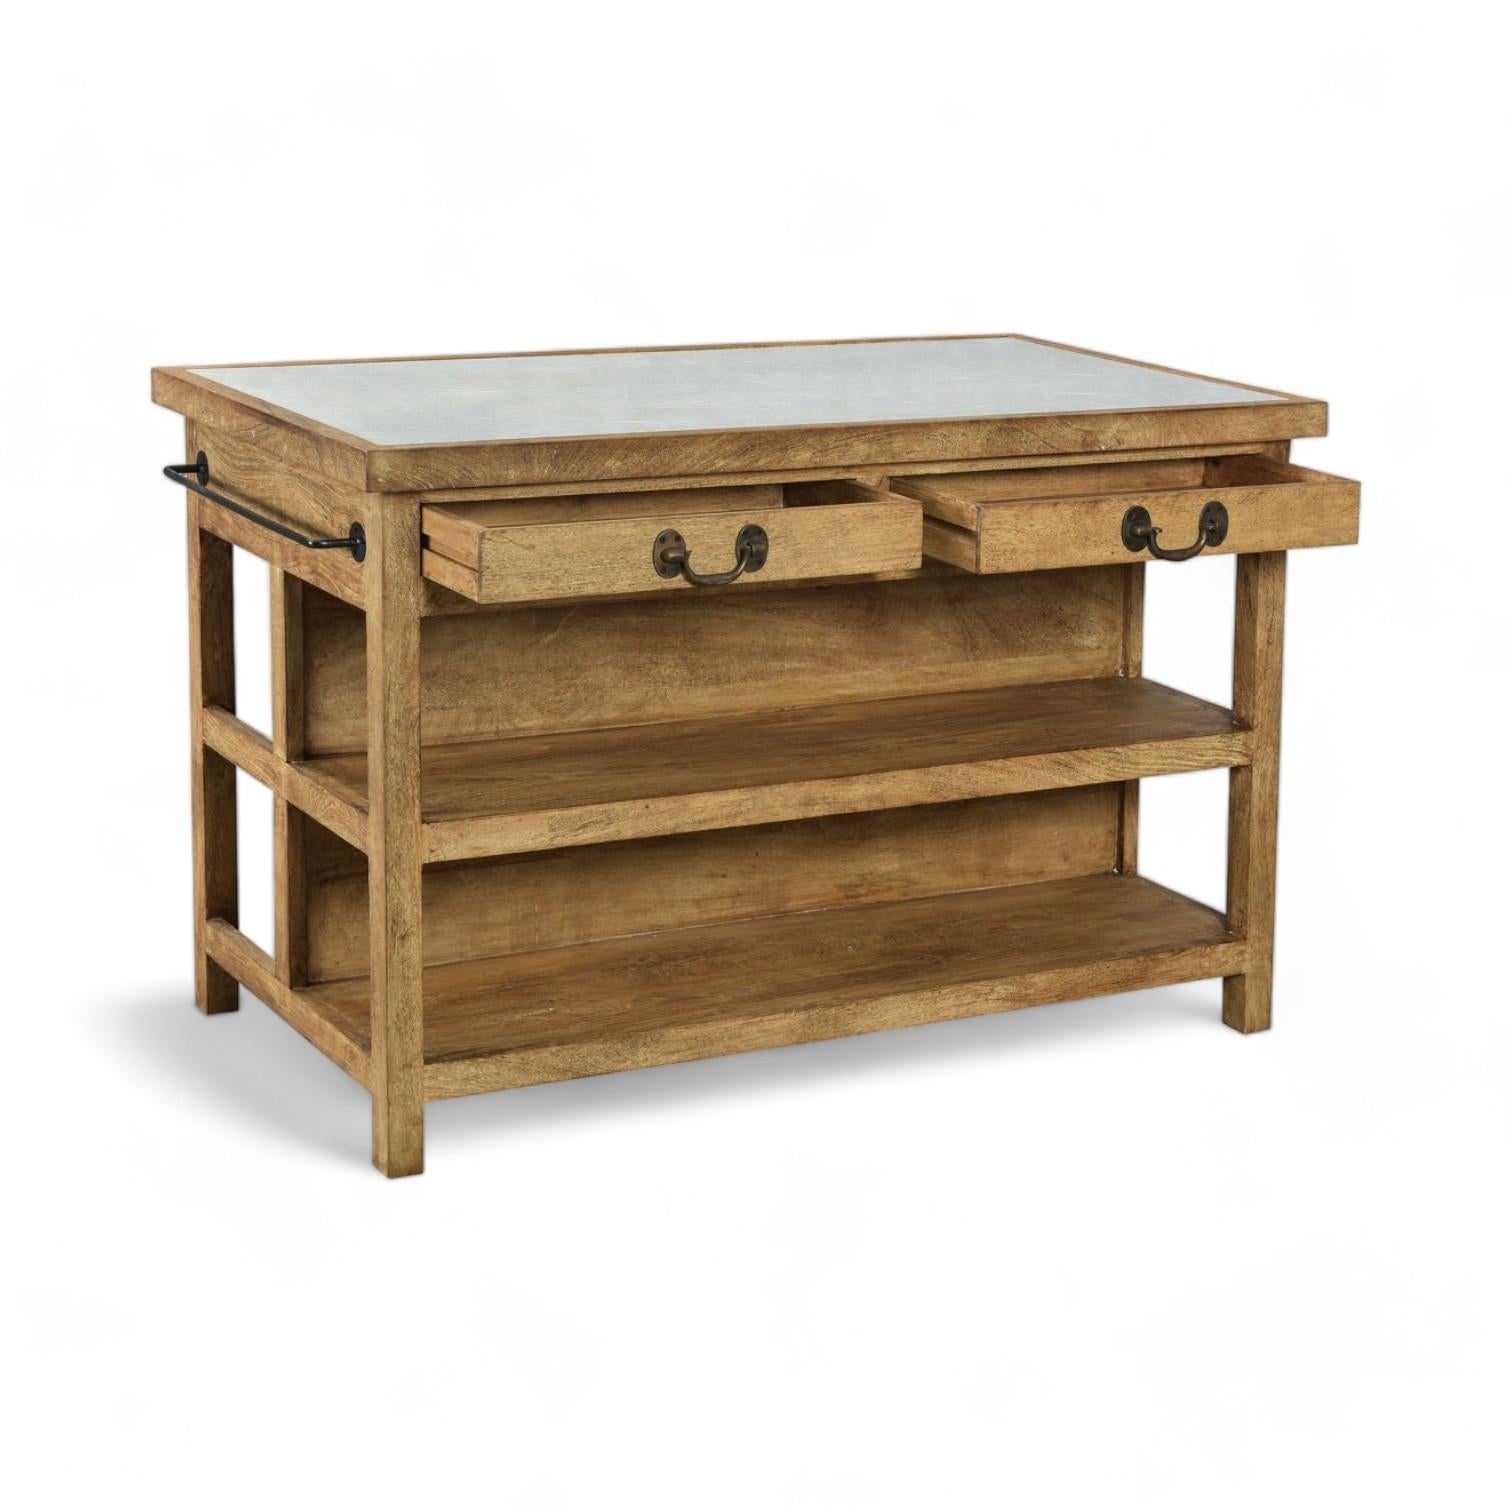 Stone Top Wooden Kitchen Island with Storage / Counter / Dry Bar  1